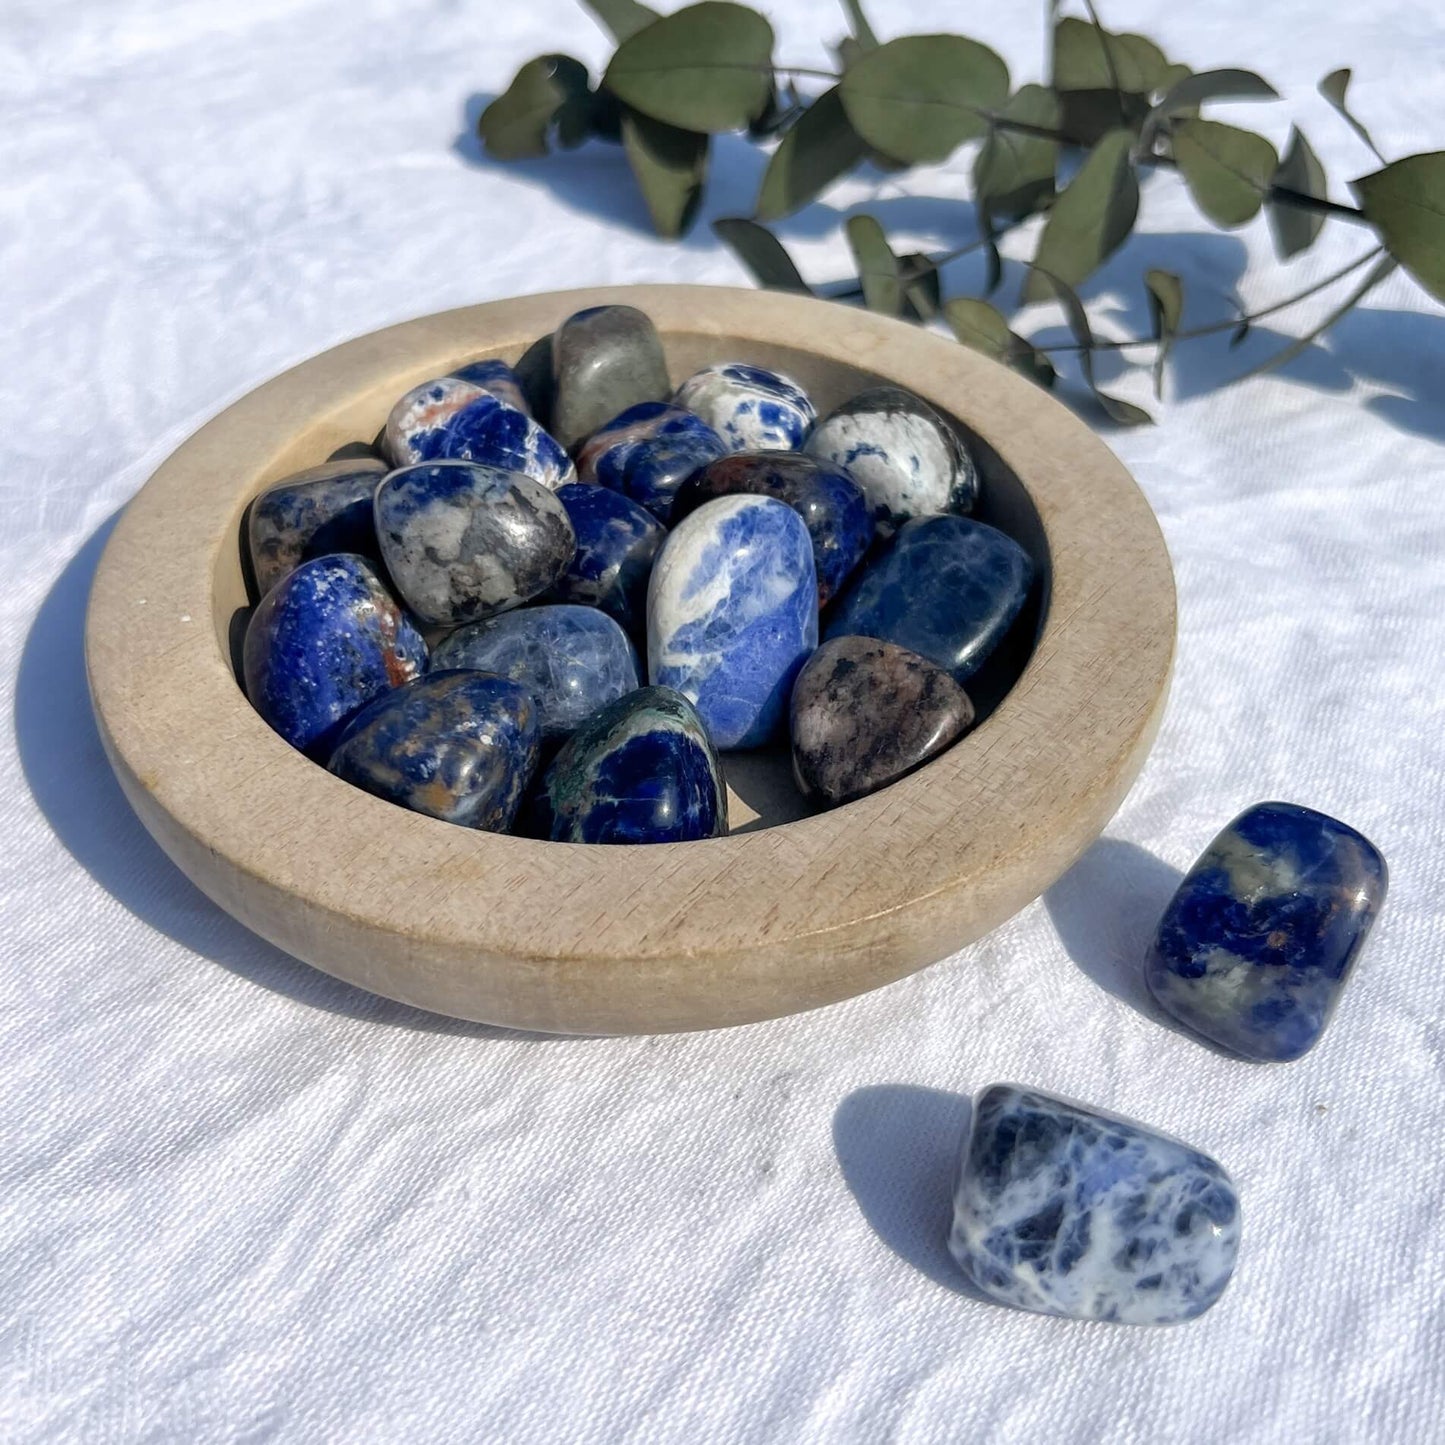 Wooden dish overflowing with extra large blue and white sodalite crystal tumblestones